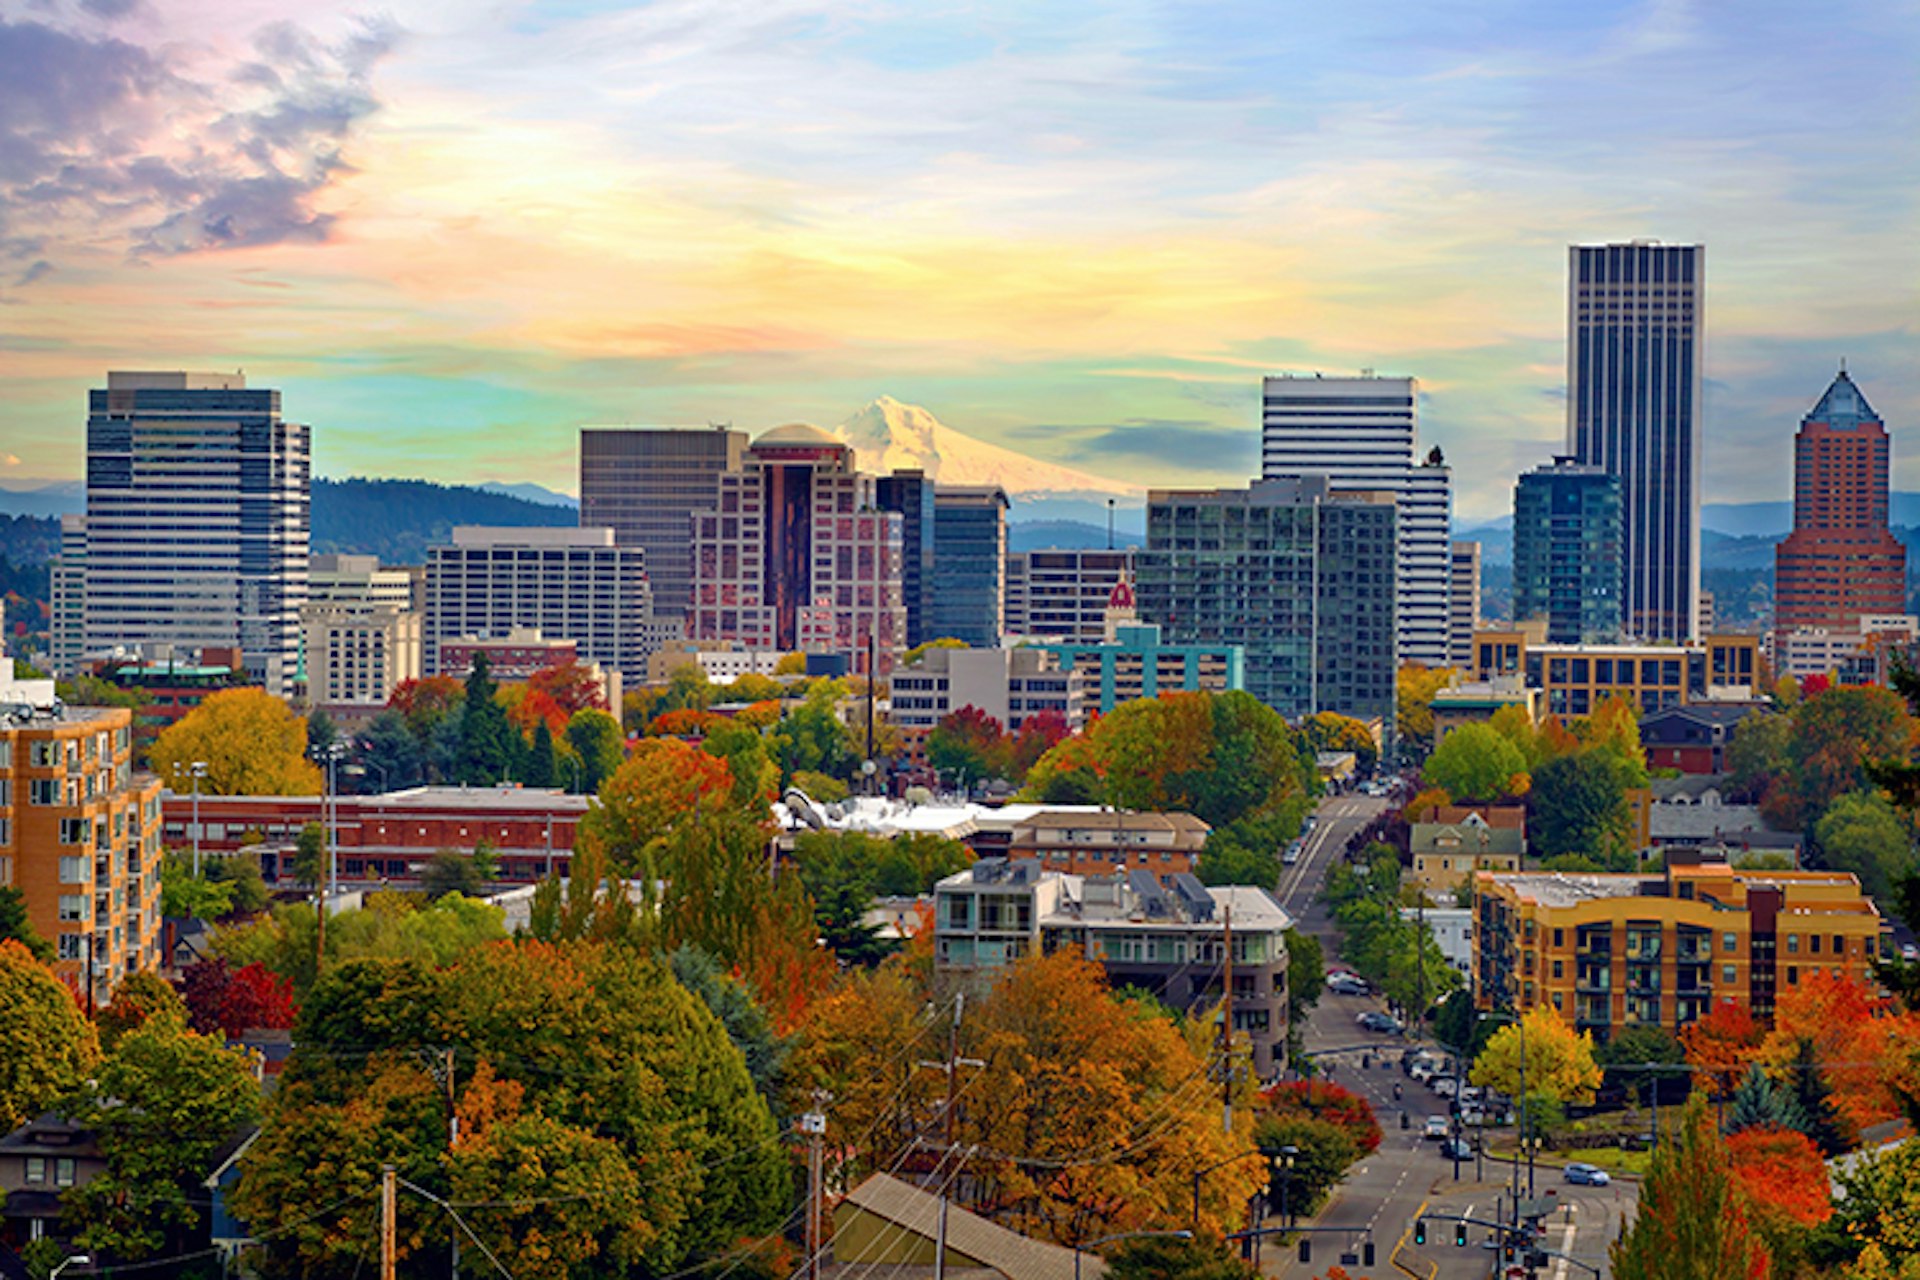 Portland skyline in autumn. Image by David Gn Photography / Moment / Getty